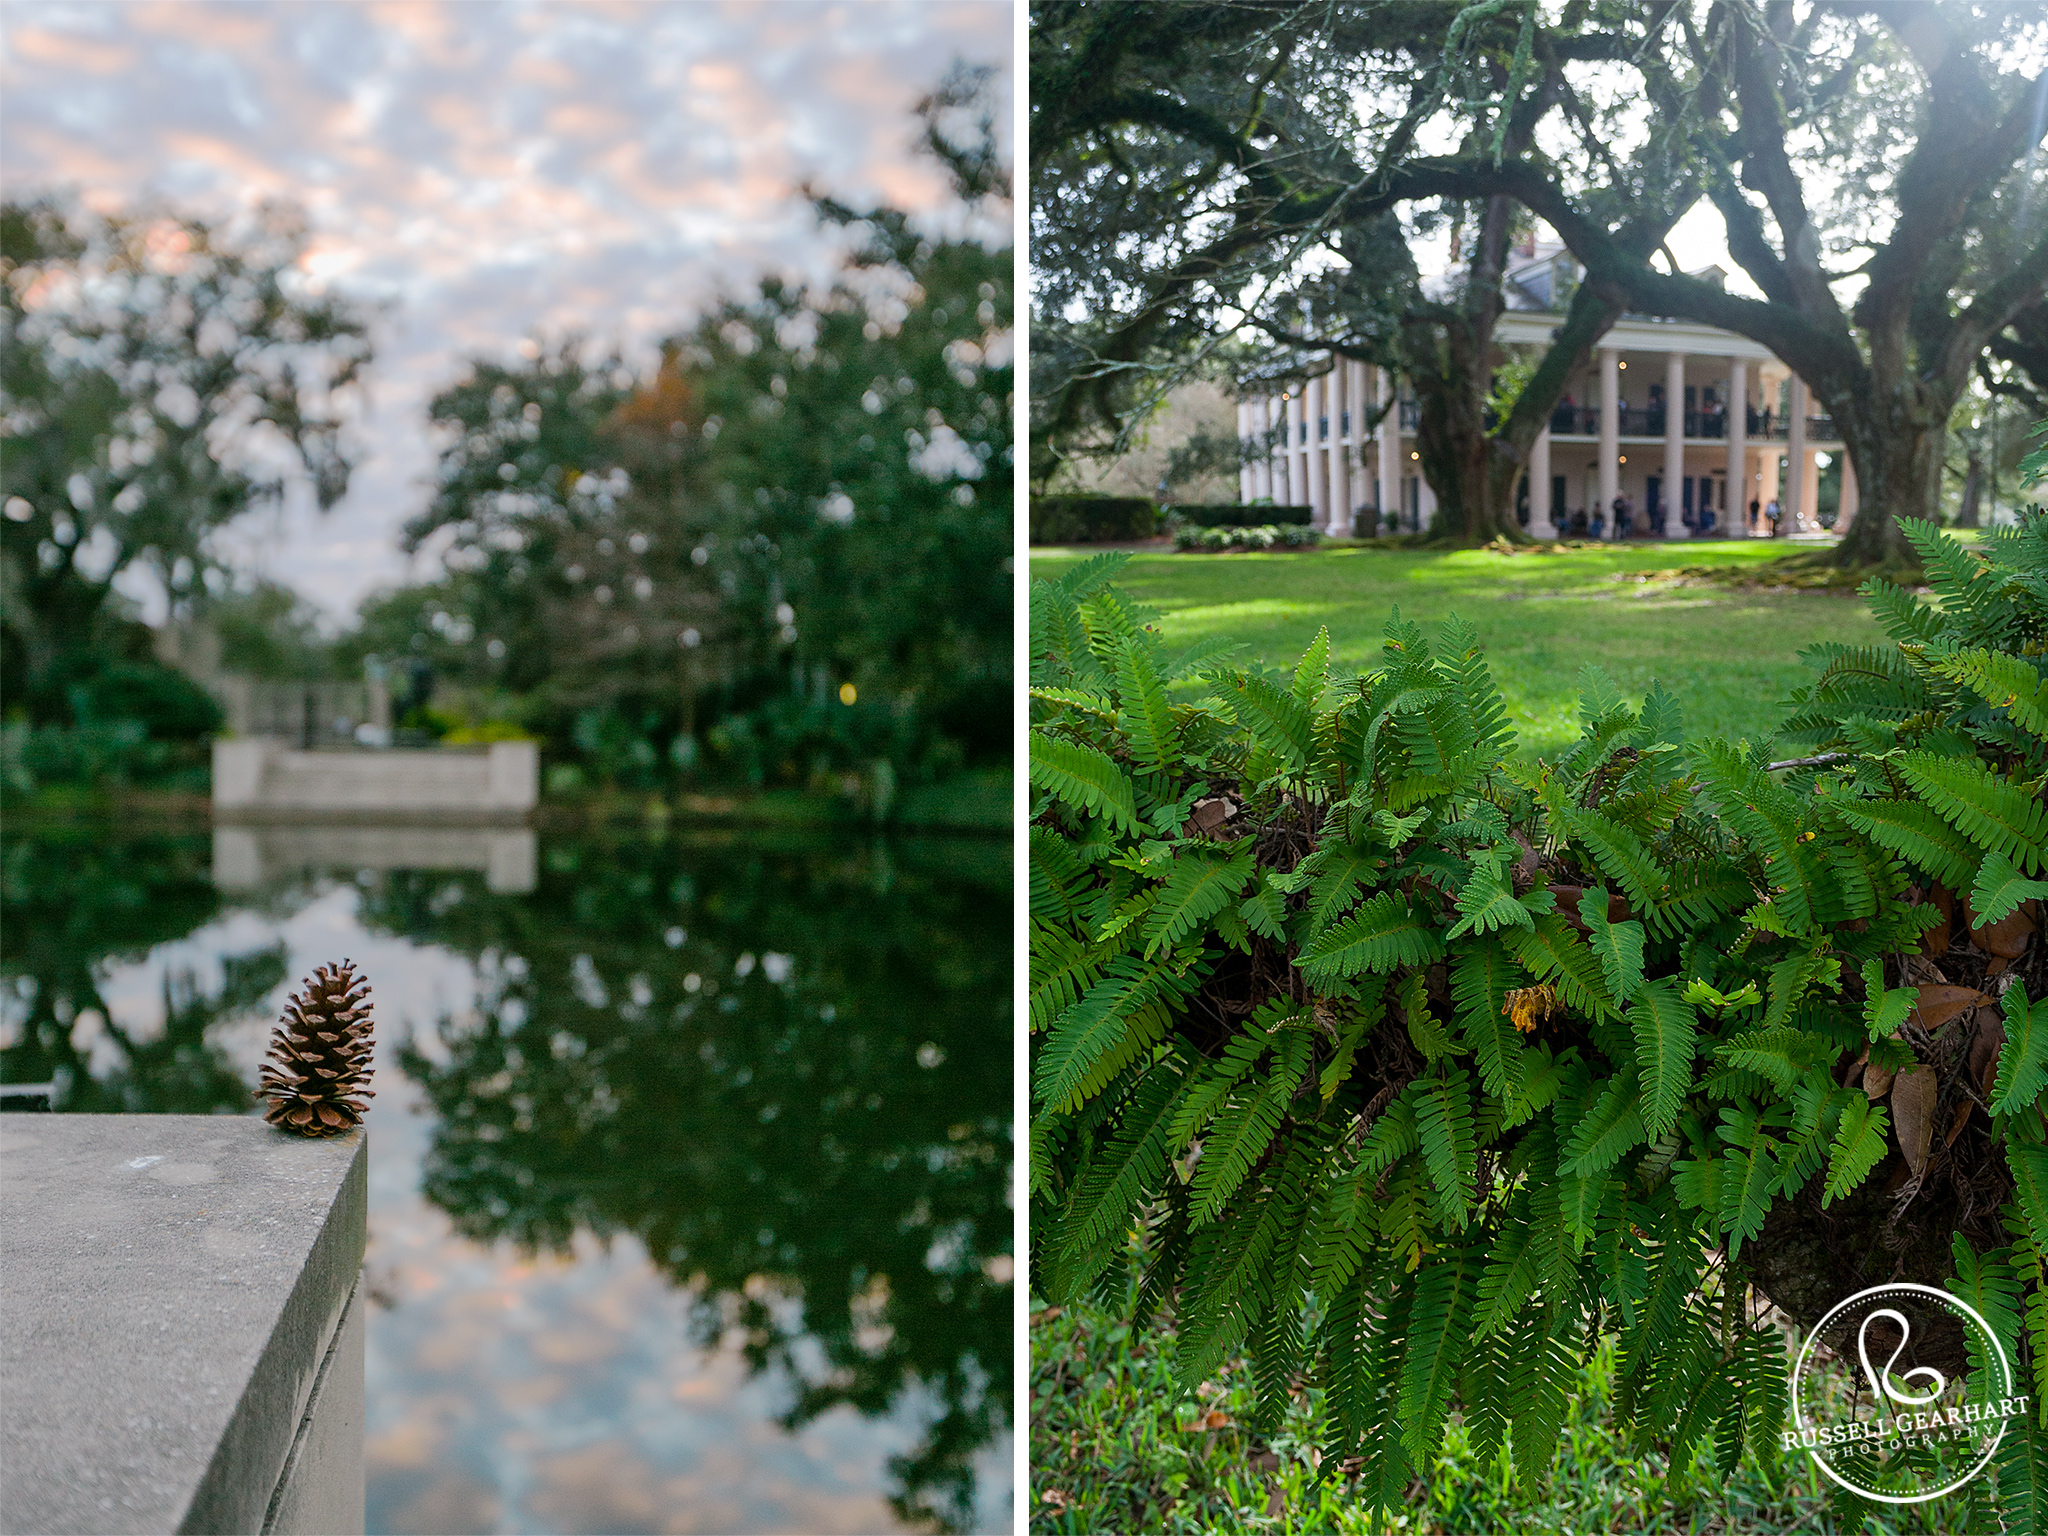 I am in love with the moss growing all over the oak trees at Oak Alley Plantation.